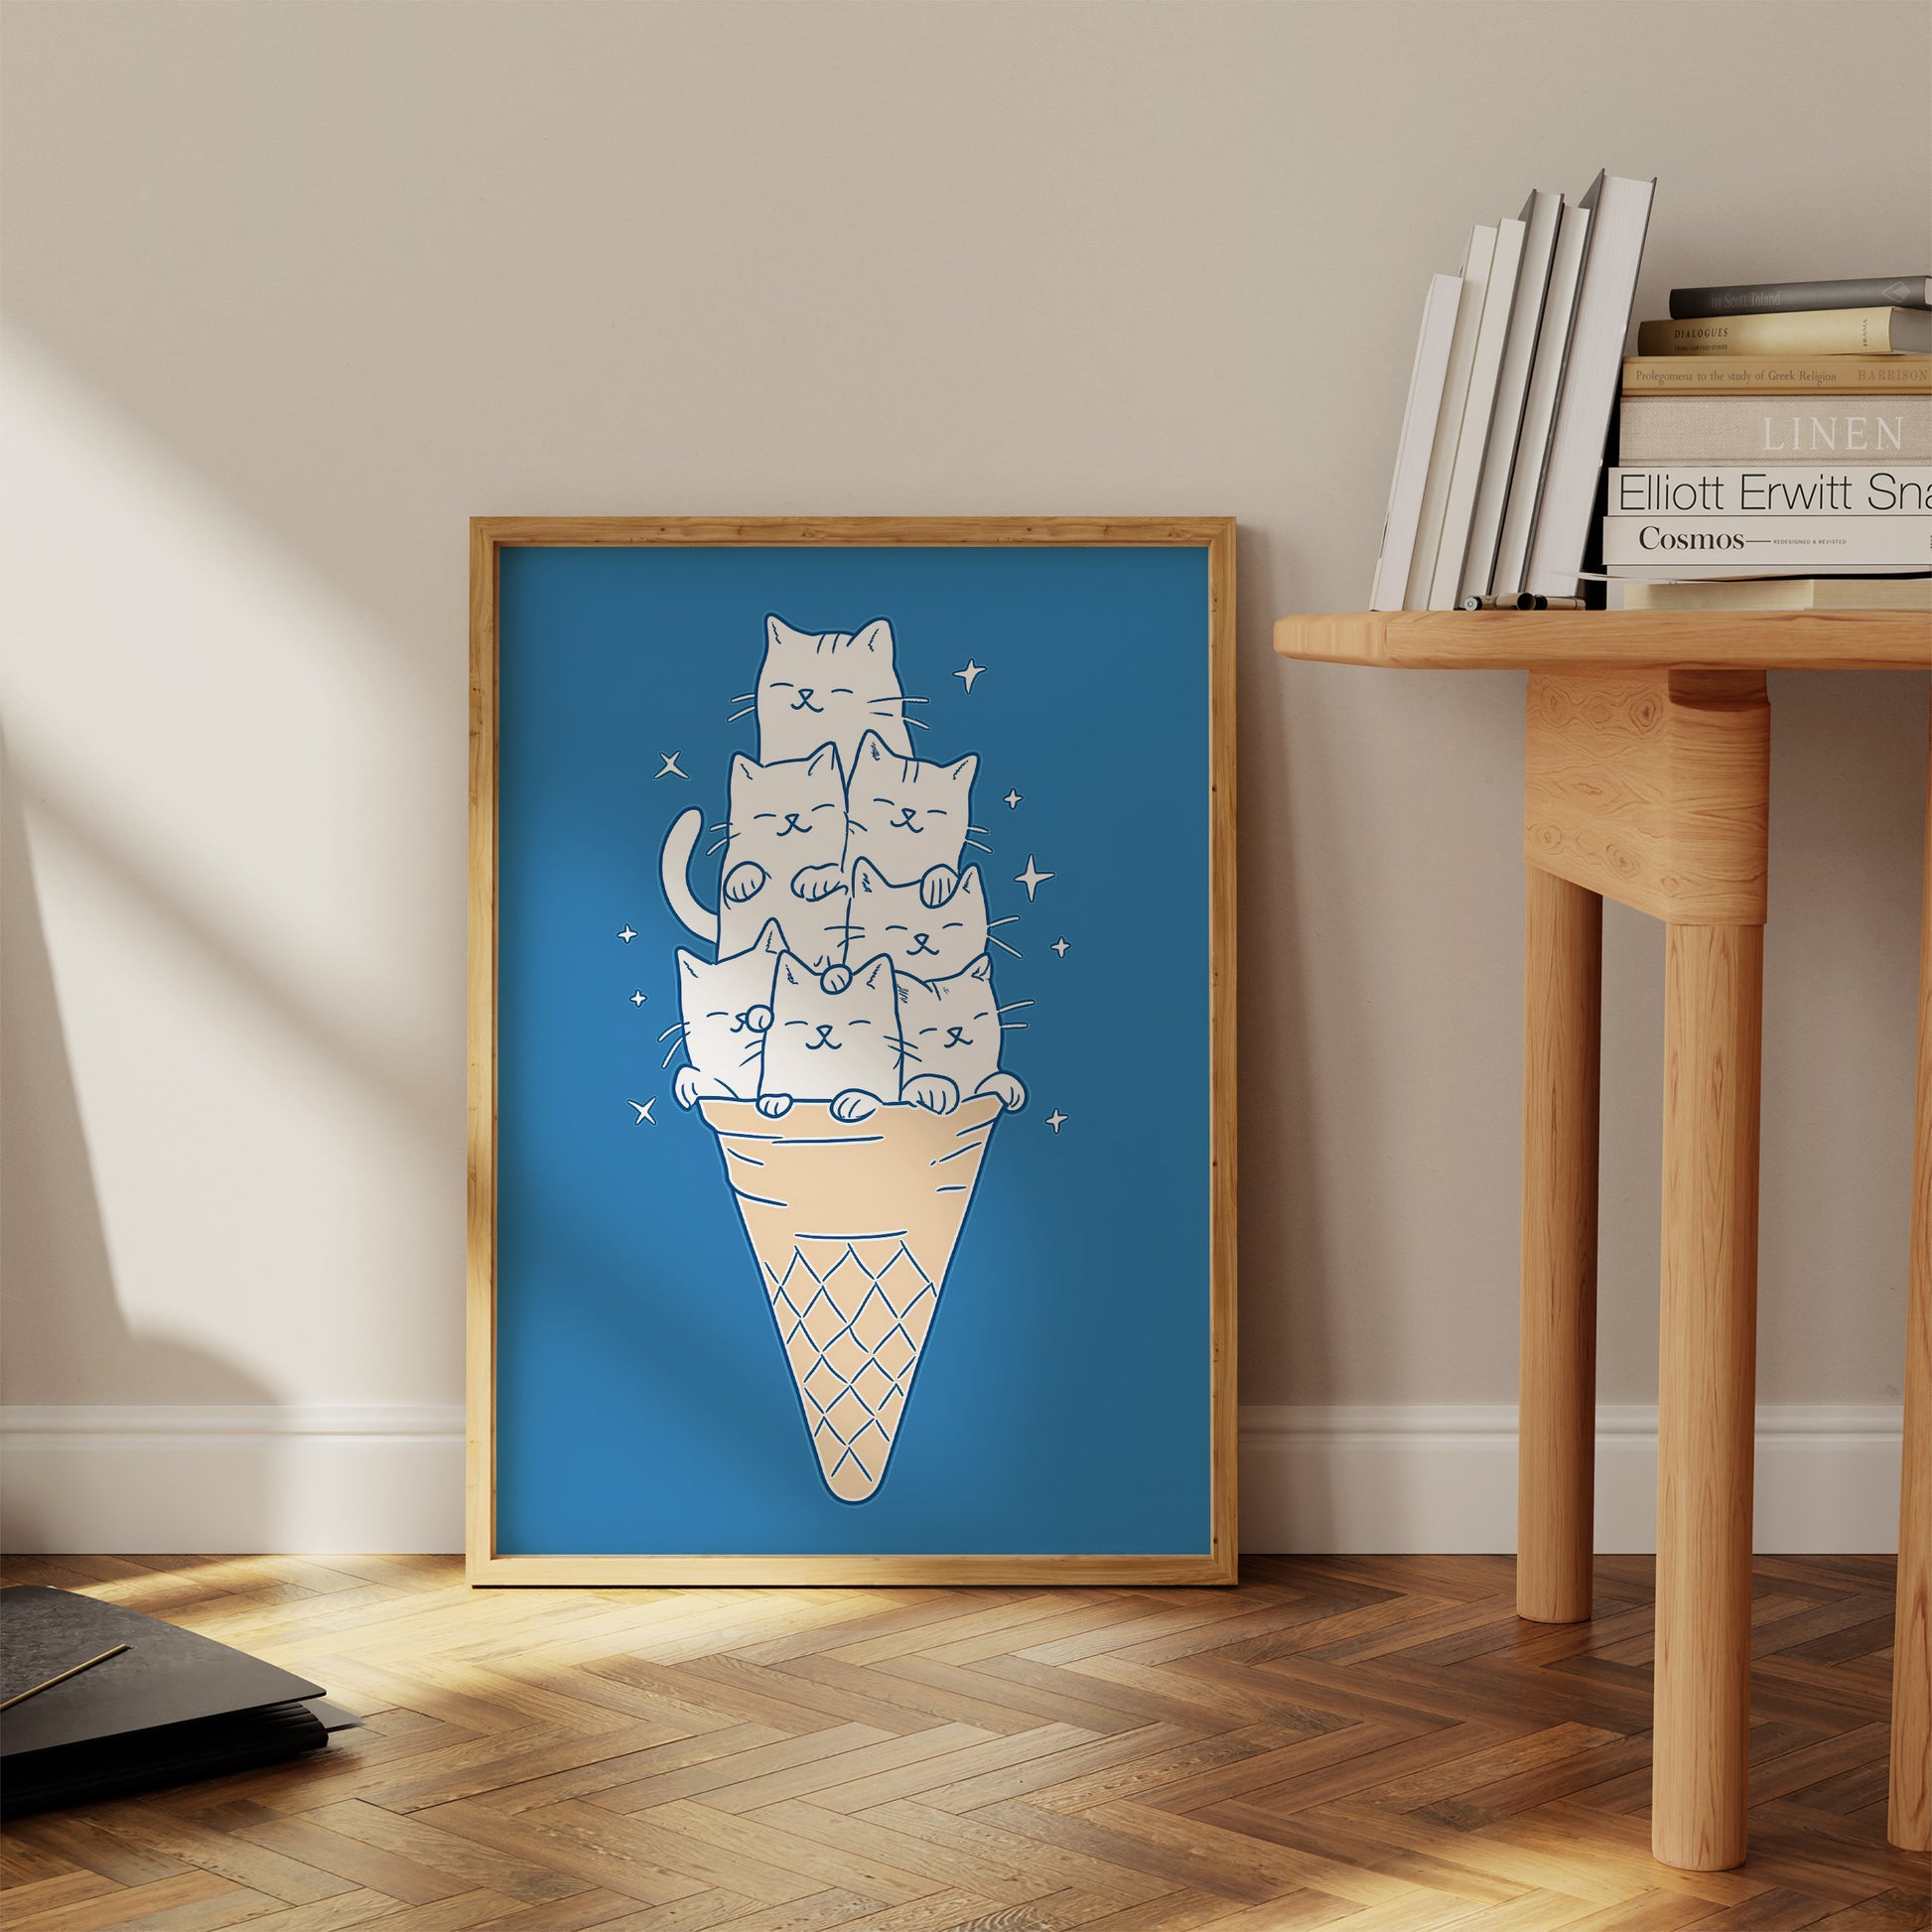 Illustration of cats stacked in an ice cream cone, framed and placed against a wall.